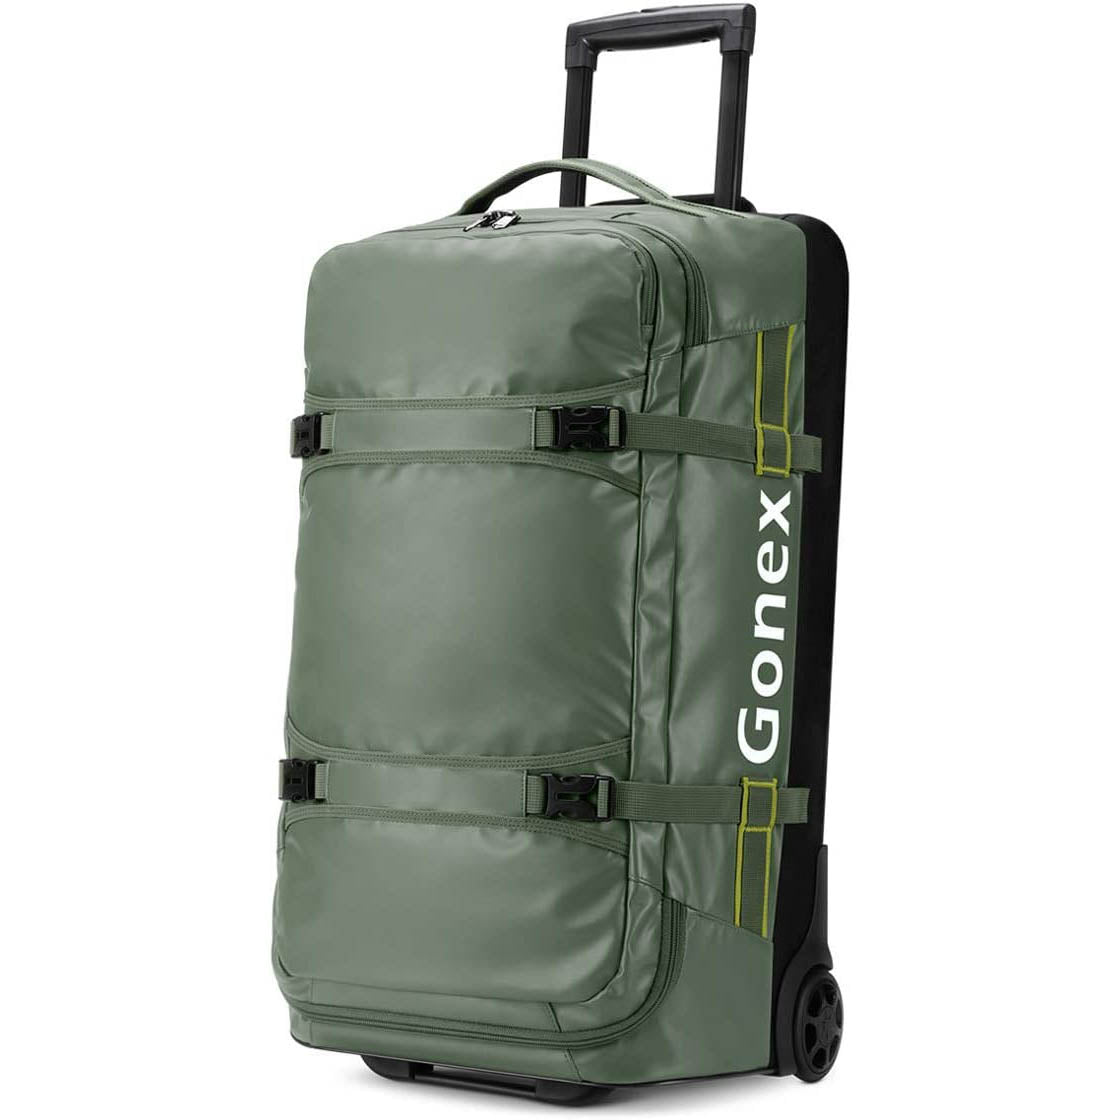 Gonex 25 Inch Rolling Duffle Bags with Wheels